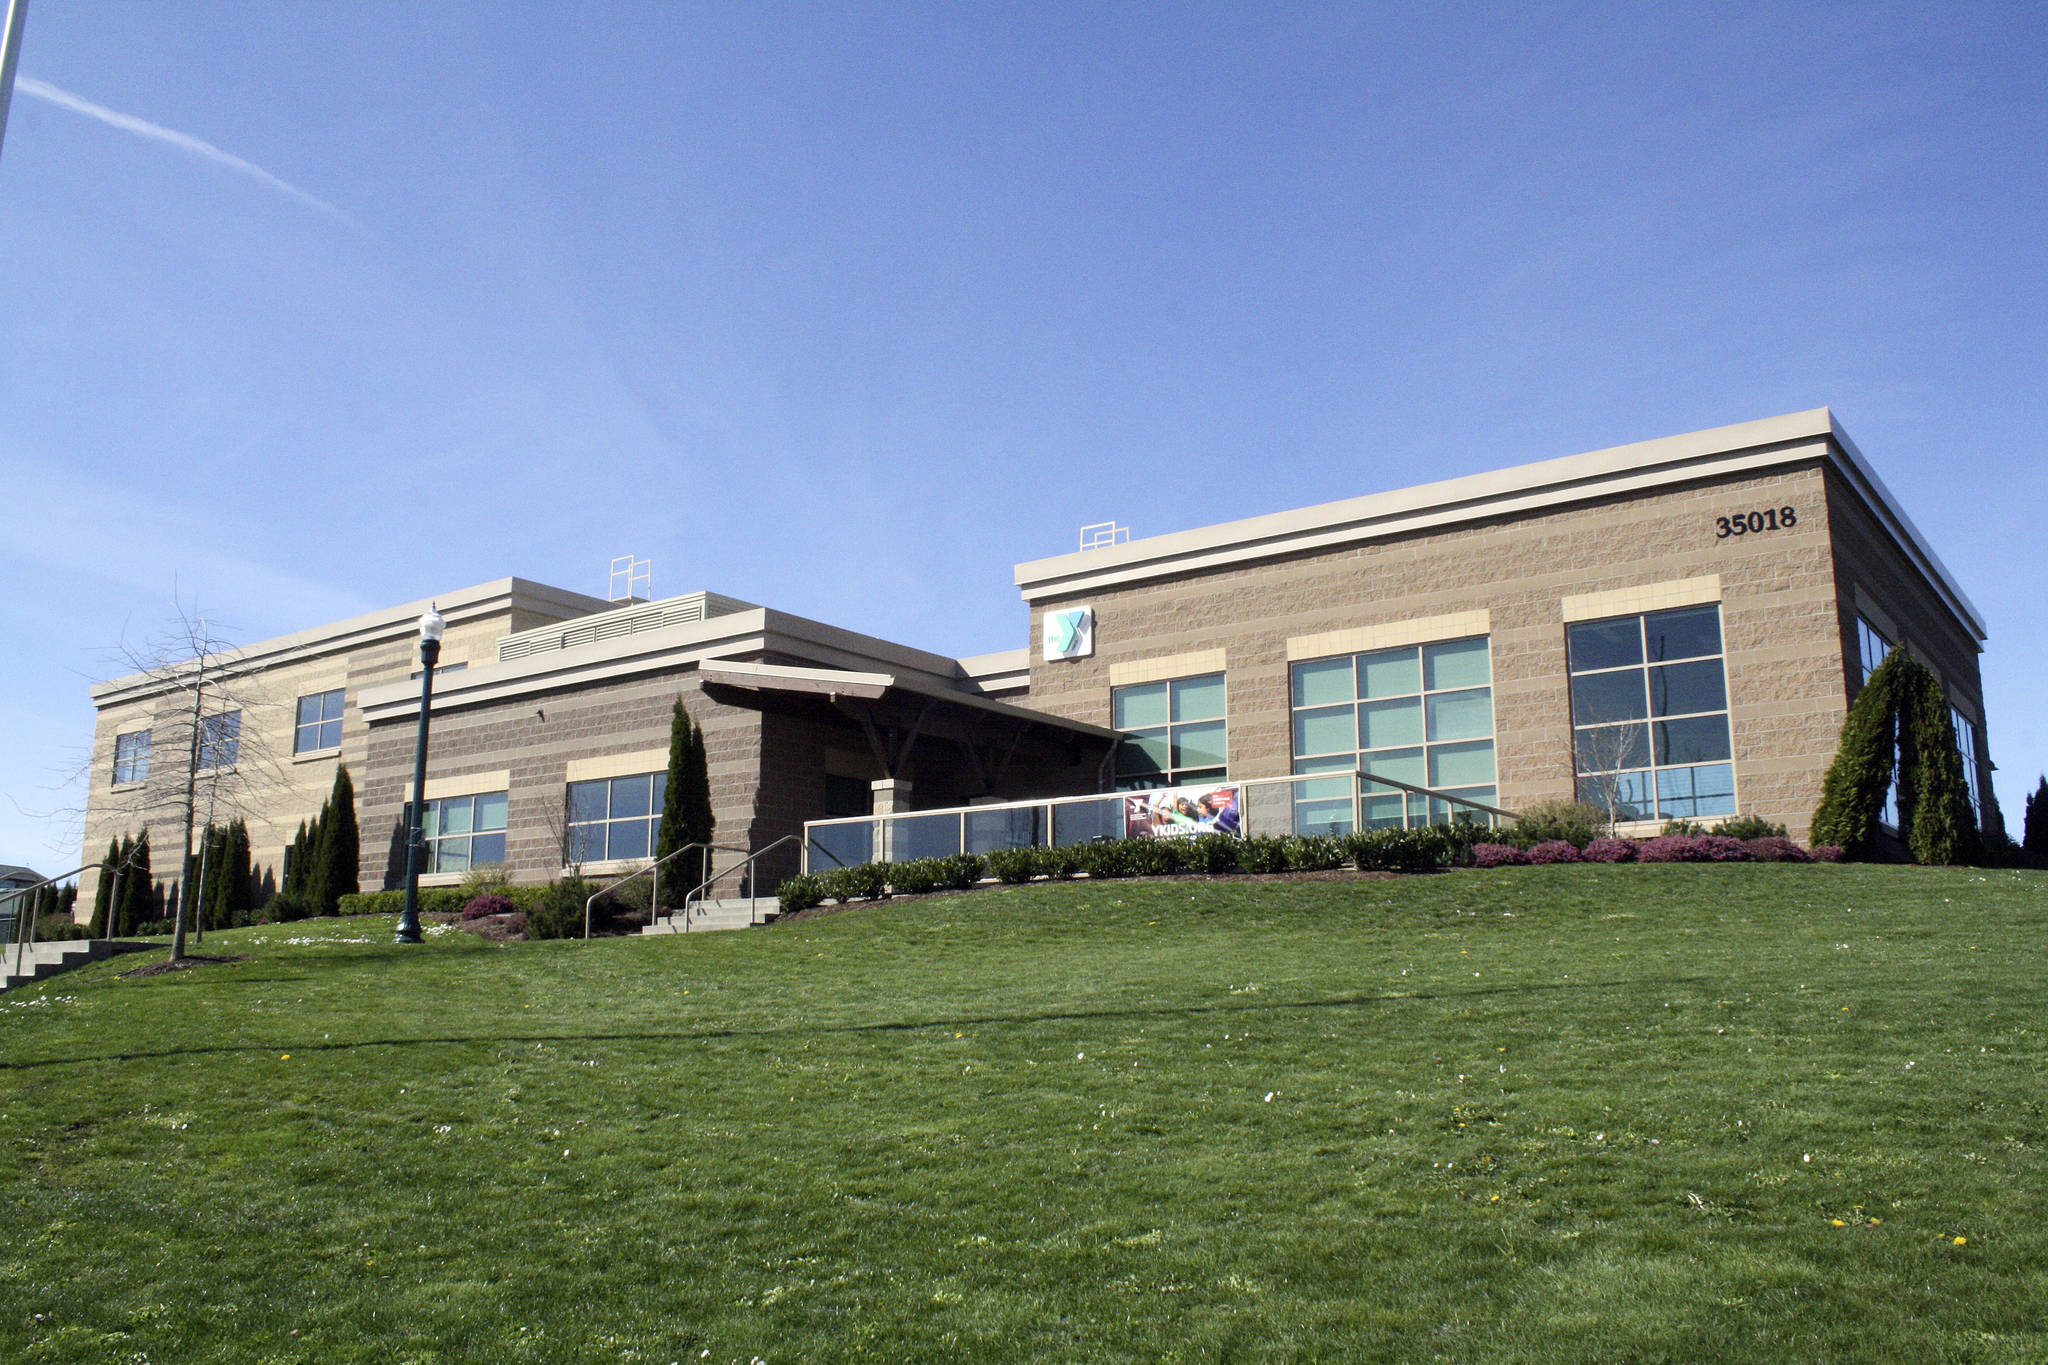 The Snoqualmie Valley YMCA/Community Center is located at 35018 SE Ridge St. File photo